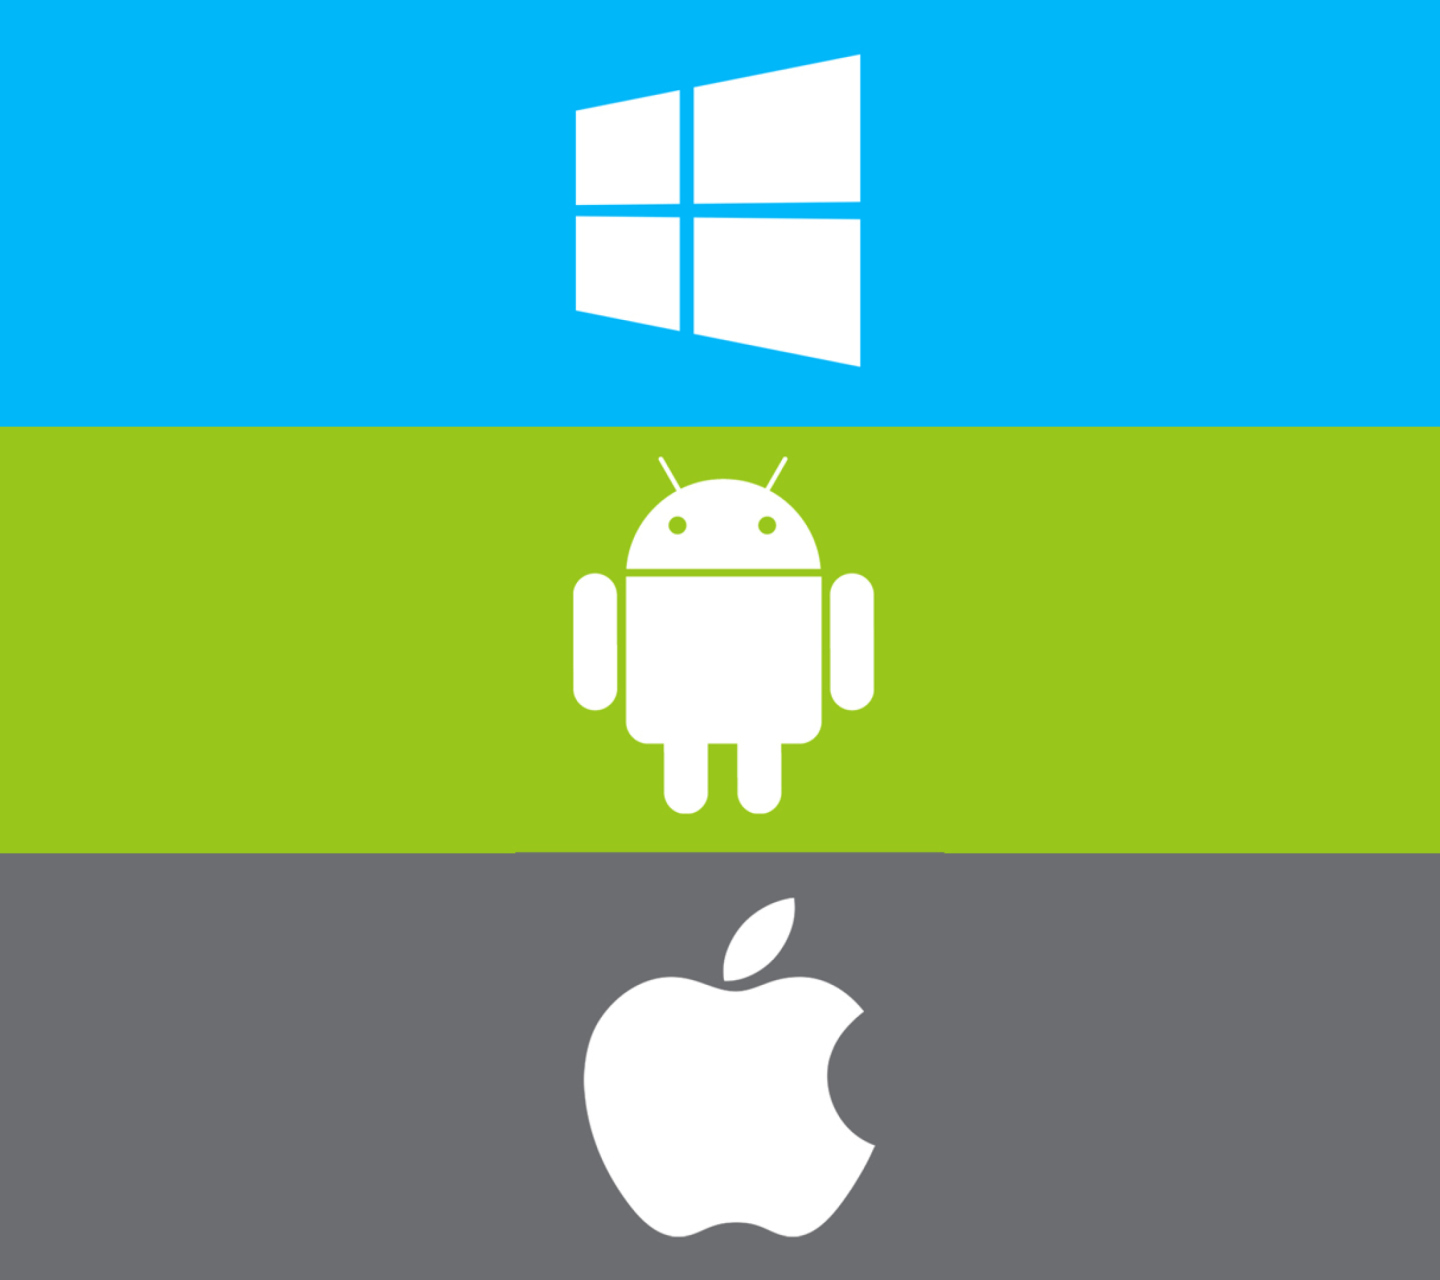 Windows, Apple, Android - What's Your Choice? screenshot #1 1440x1280